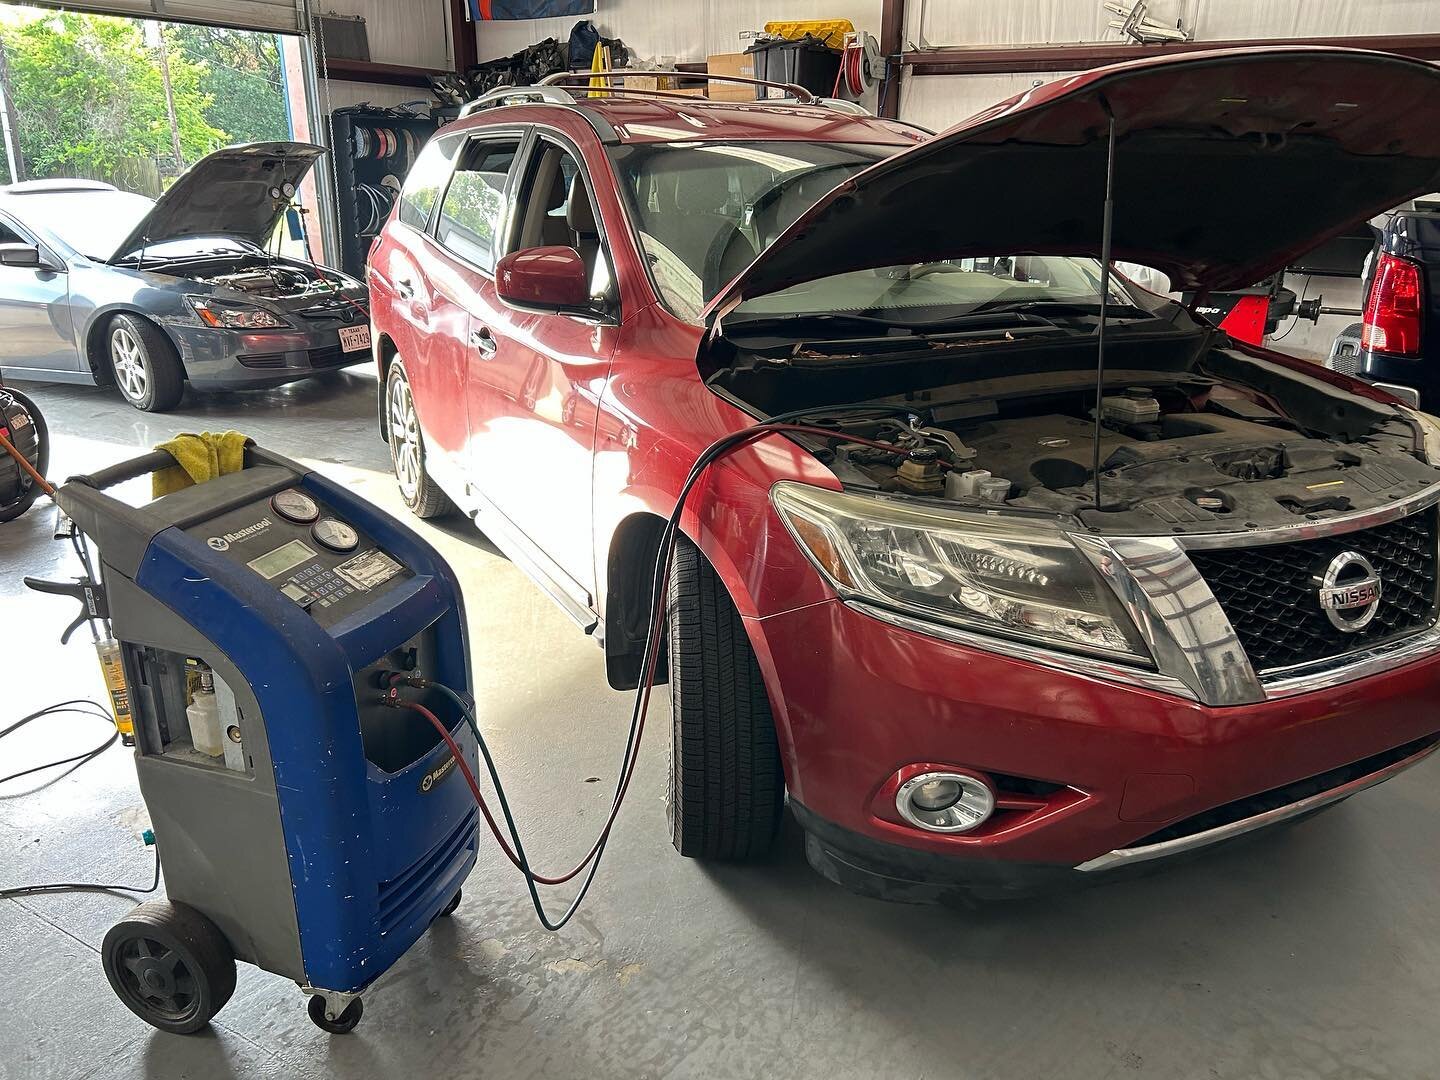 #nissan #pathfinder came in with a burnt up clutch but also a leaking compressor. Swapped out and back to ice cold air. Backed by our 2yr 20k warranty as well. #arhindrichsllc #houston #texas #cypresstexas #thatmiatashop #vq35 #acfix #nissanpathfinde